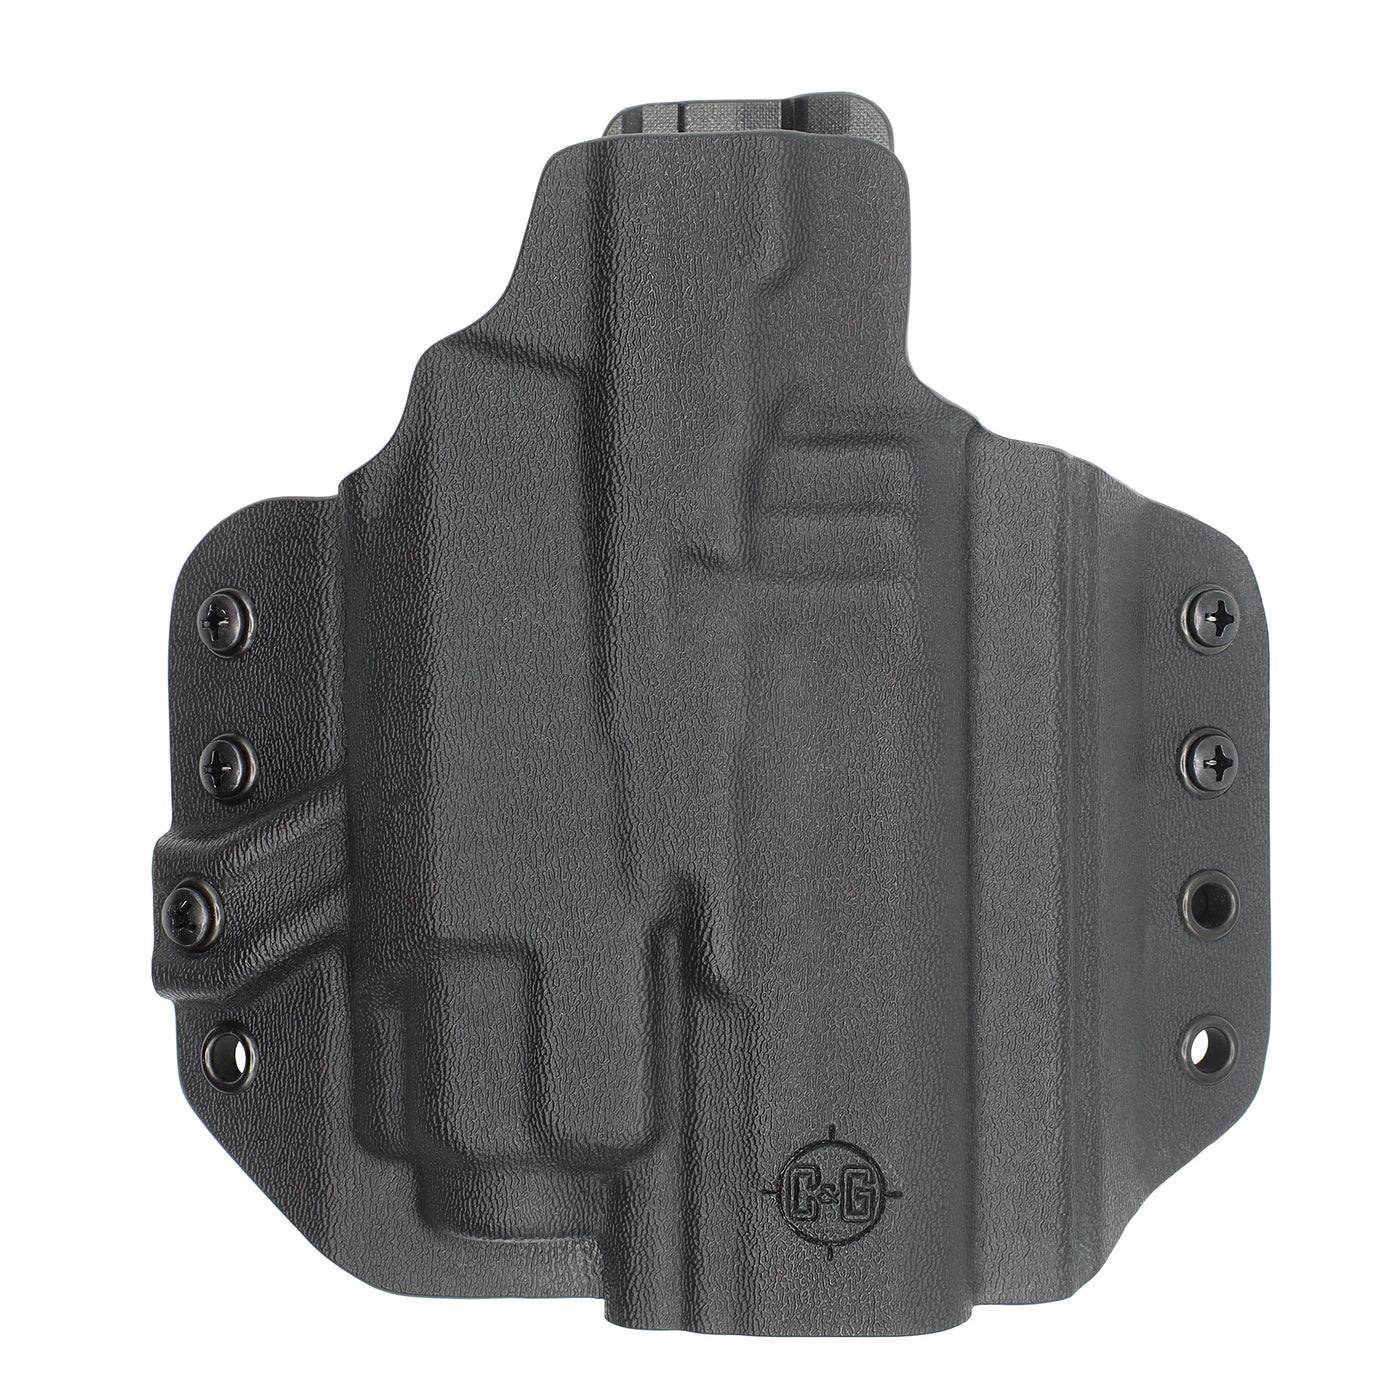 C&G Holsters custom OWB Tactical CZ P07/P09 Streamlight TLR8